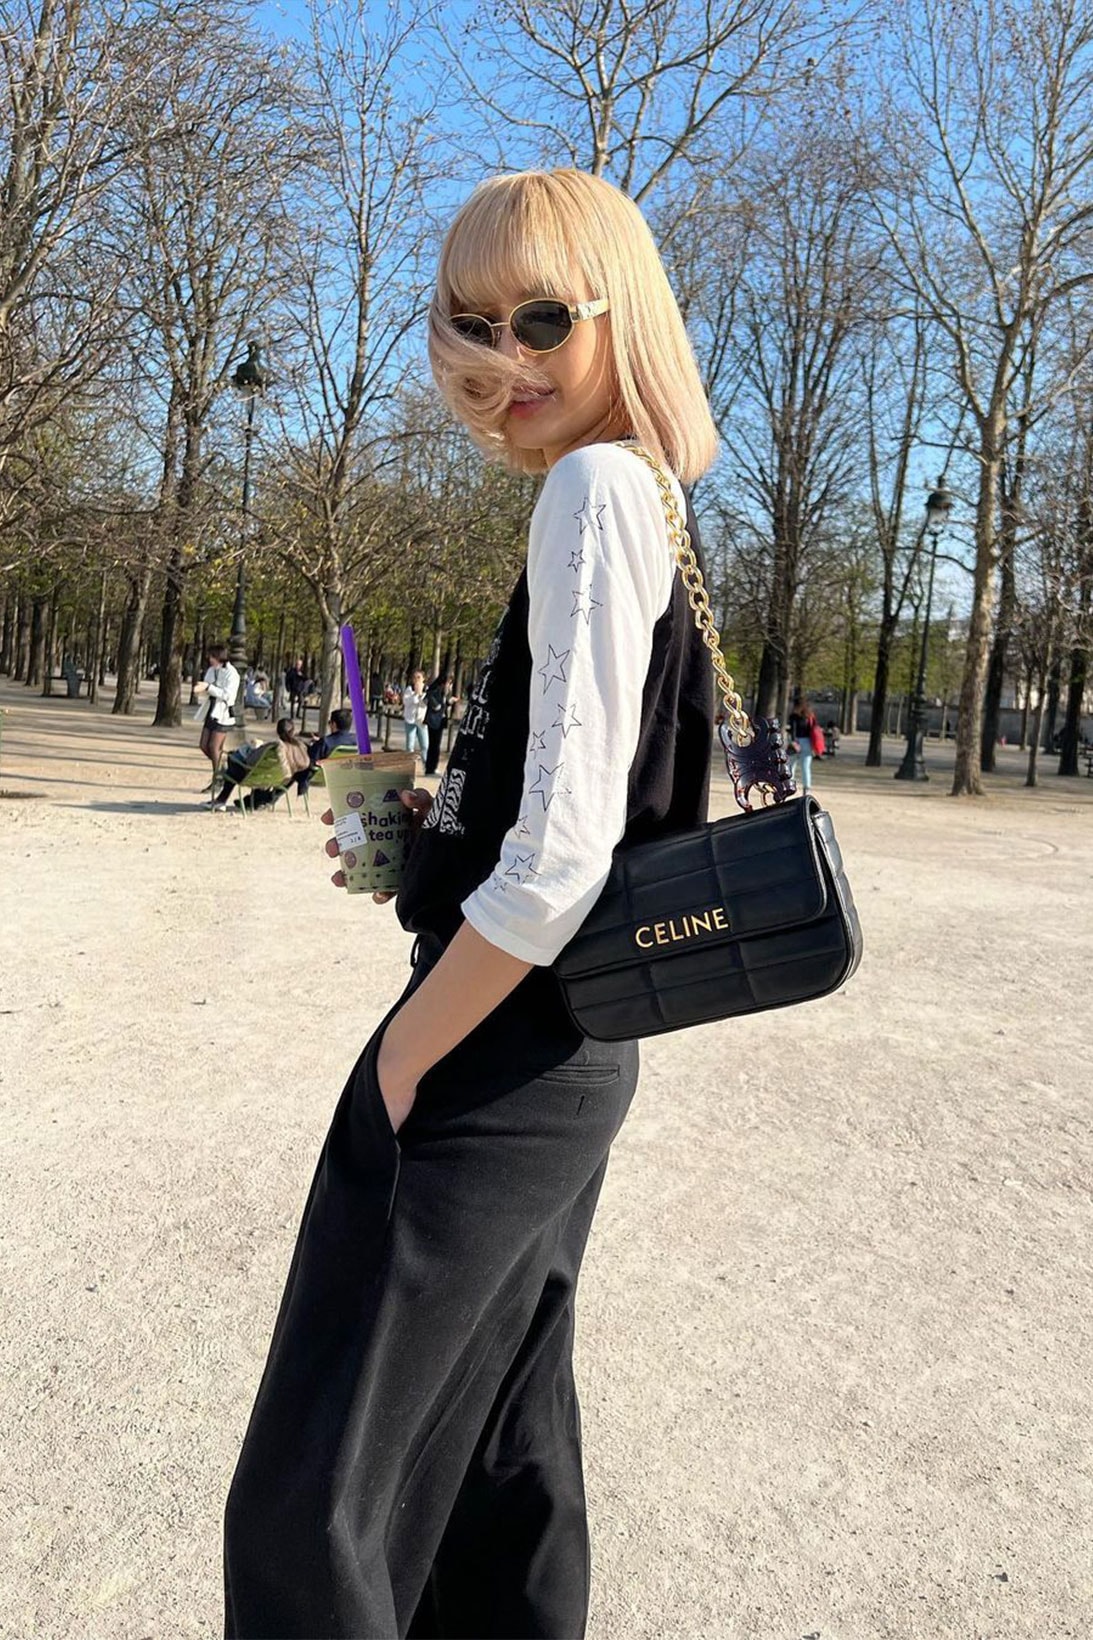 a moment for my new @celine ava bag